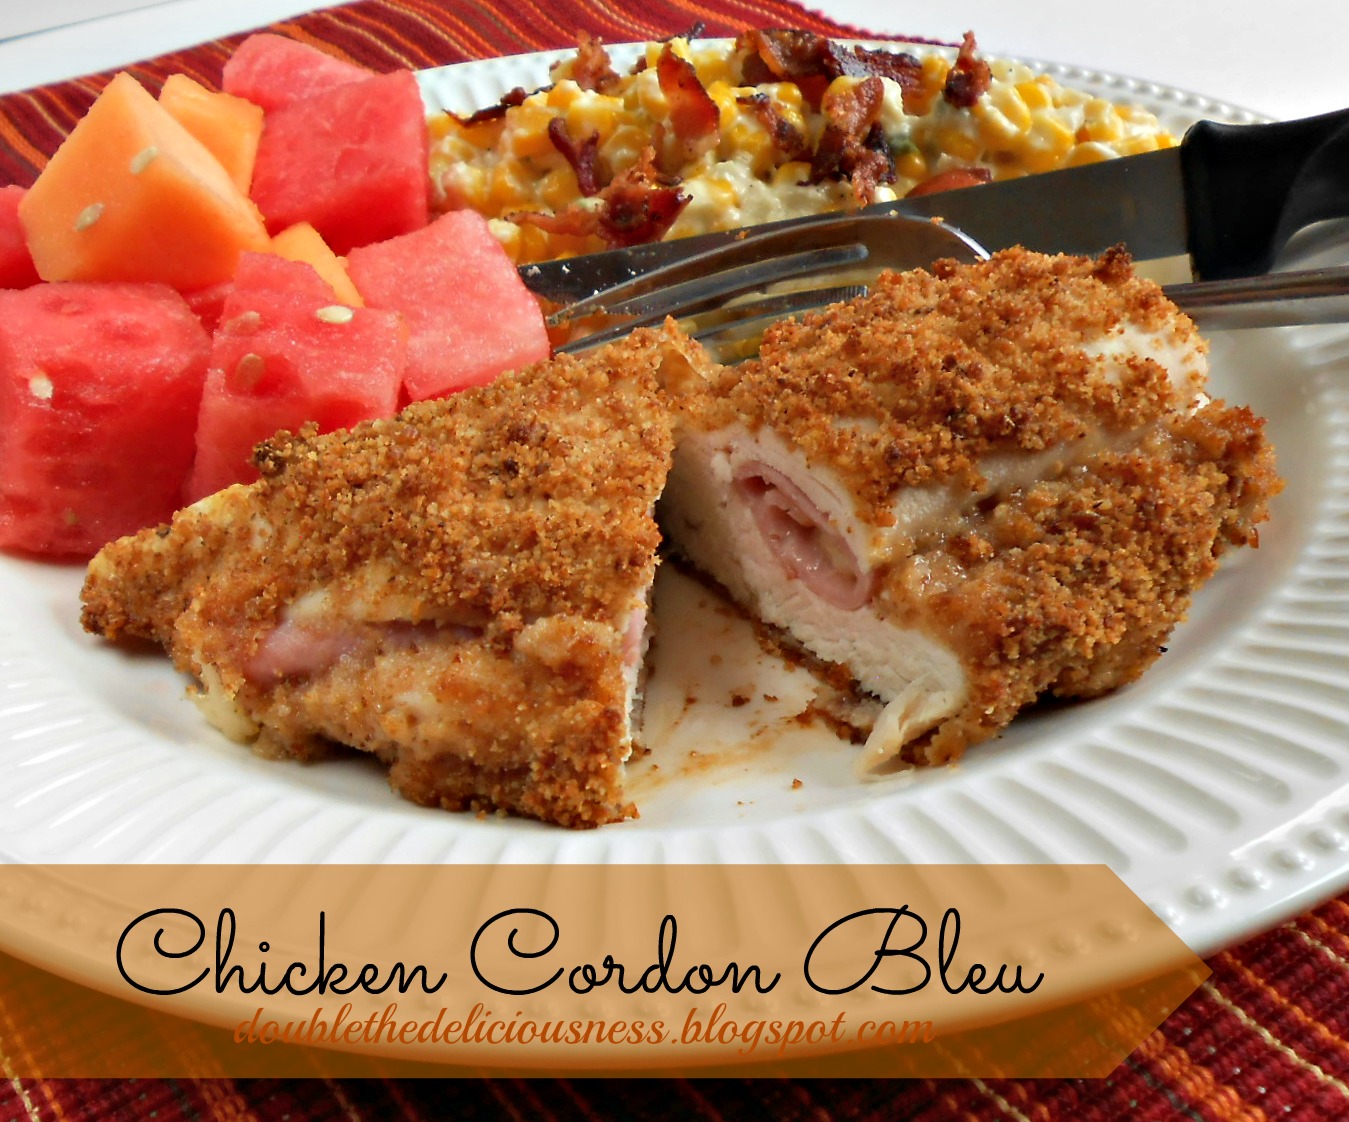 For a quicker version, you may also like this skillet chicken cordon bleu w...